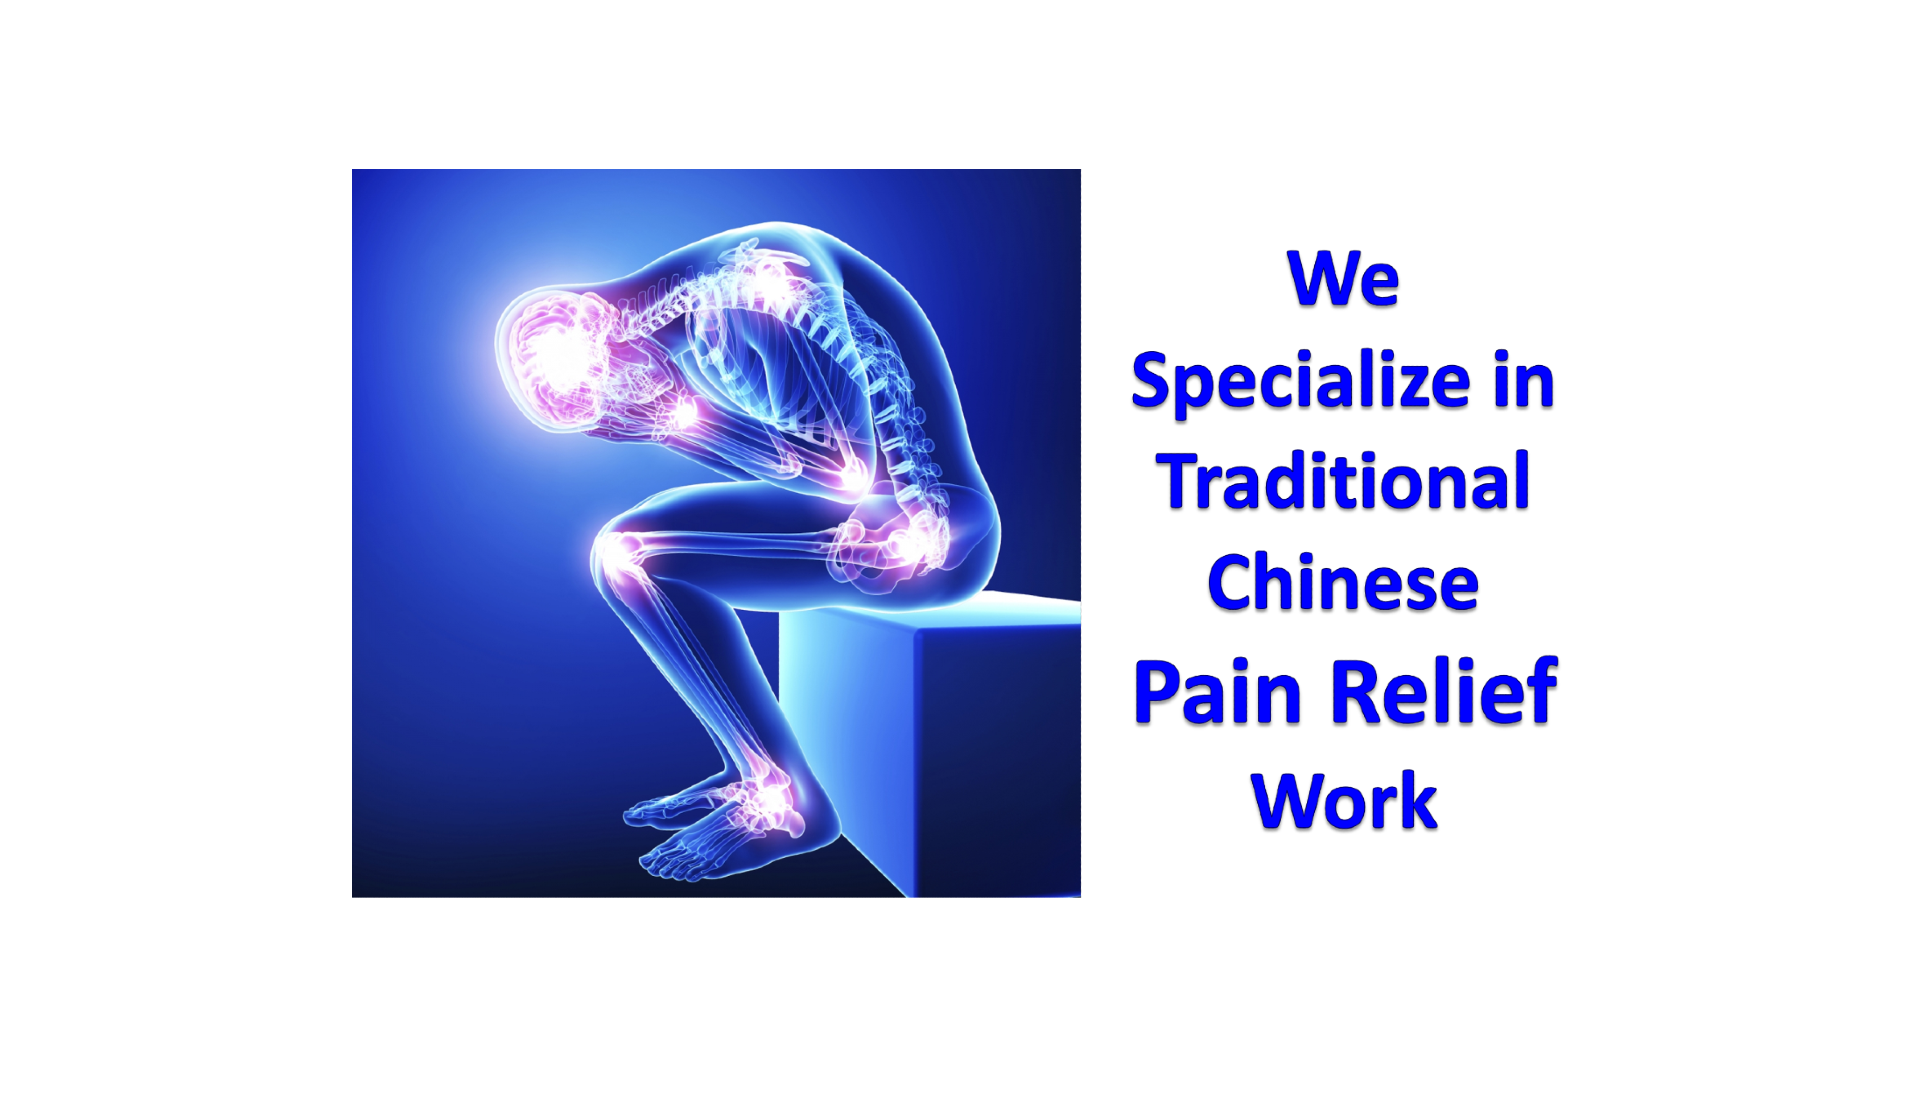 We Specialize in Pain Relief Work